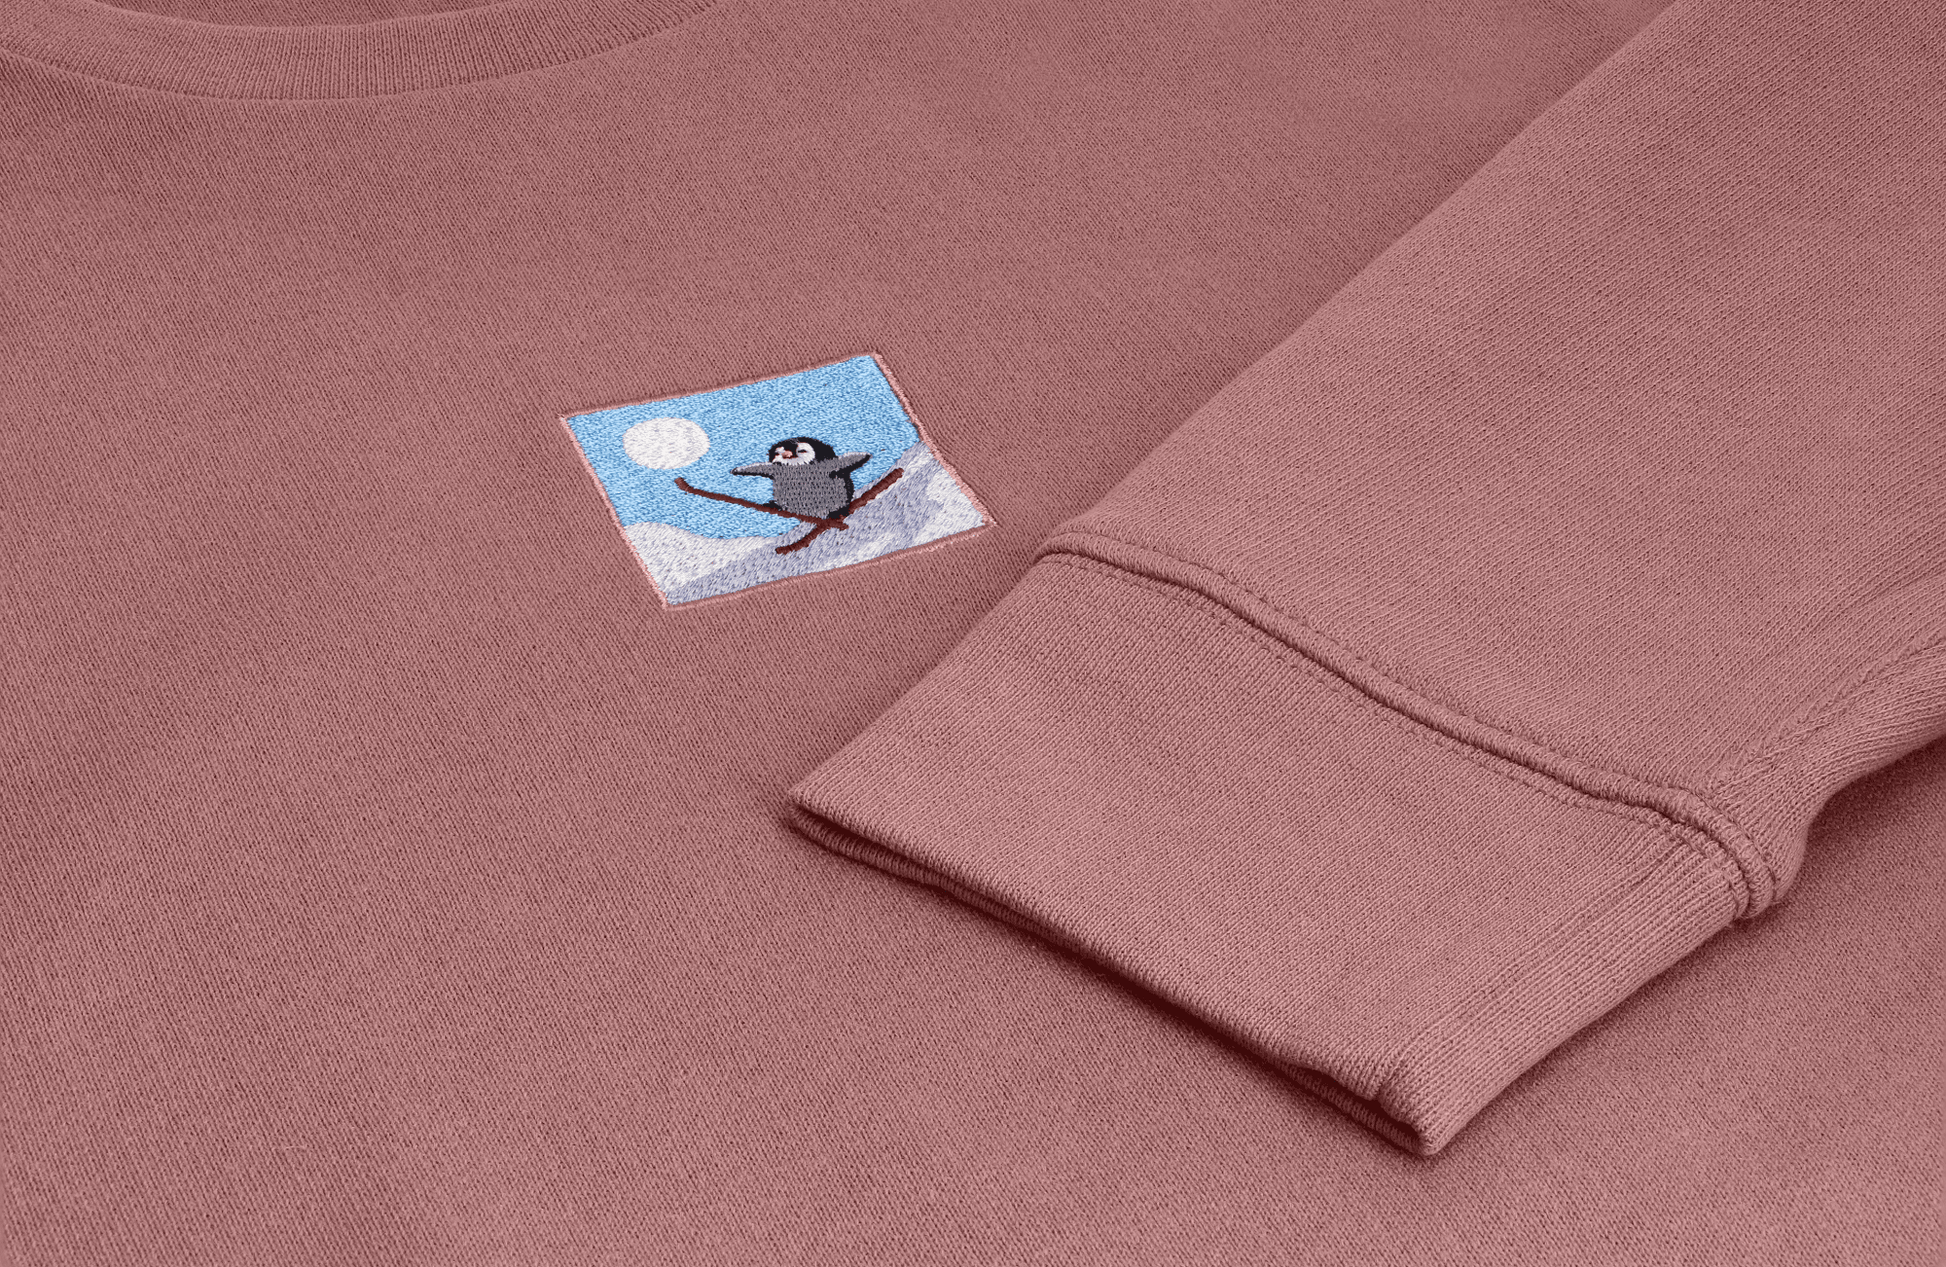 Hit the ski slopes with this unisex adult sweater with skiing penguin embroidery. Twin with your family: we have kids & adults sizes available.